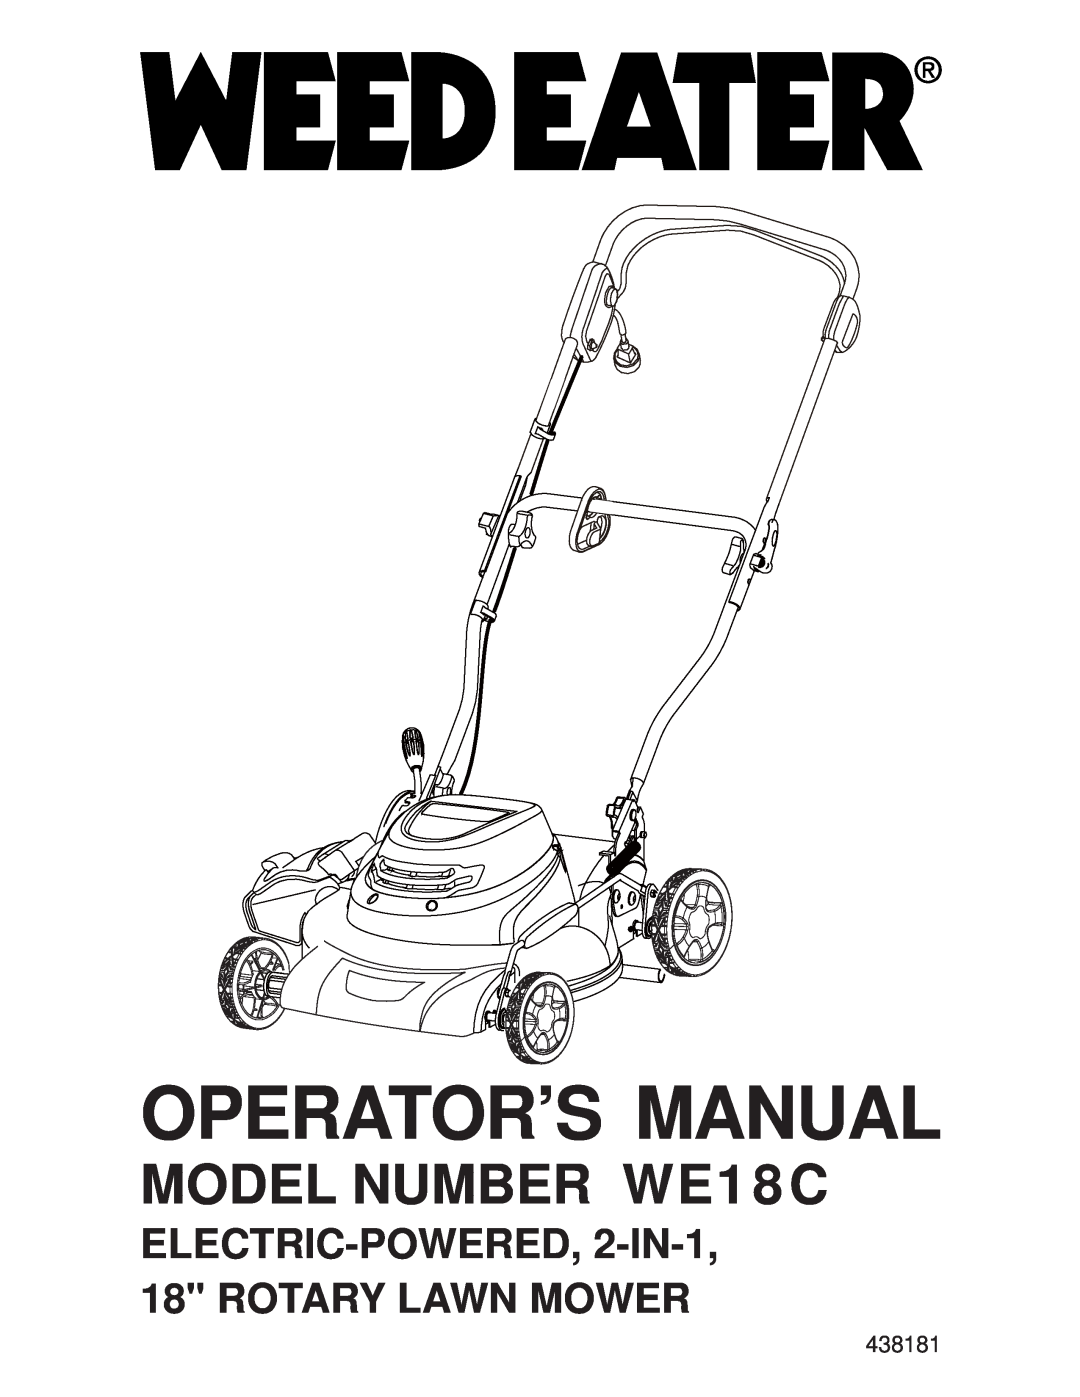 Weed Eater warranty Operator’S Manual, MODEL NUMBER WE18C, ELECTRIC-POWERED, 2-IN-1 18 ROTARY LAWN MOWER 